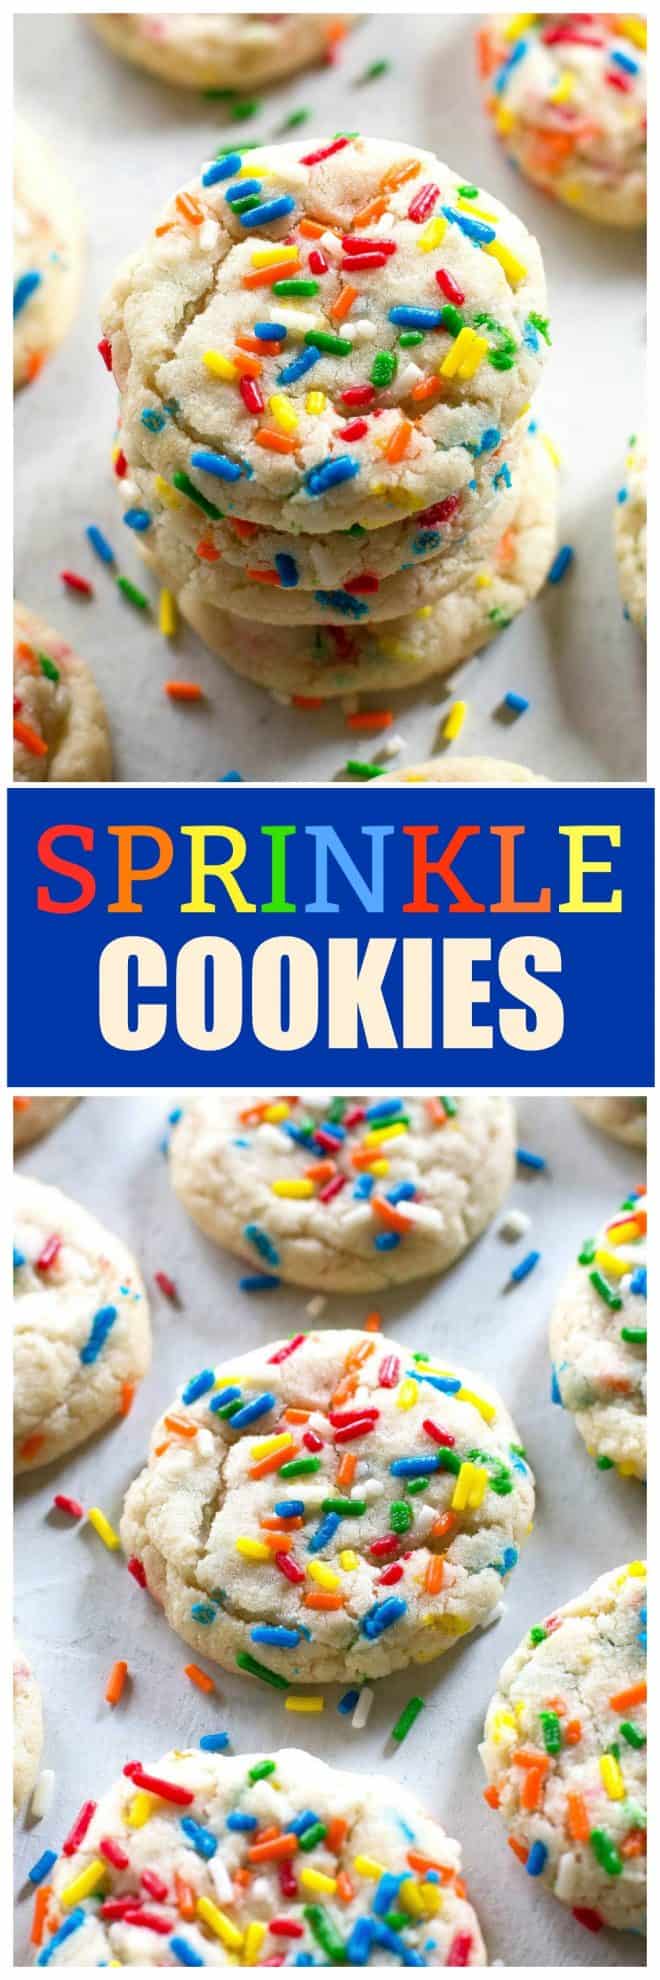 Sprinkle Cookies - The Girl Who Ate Everything All Desserts